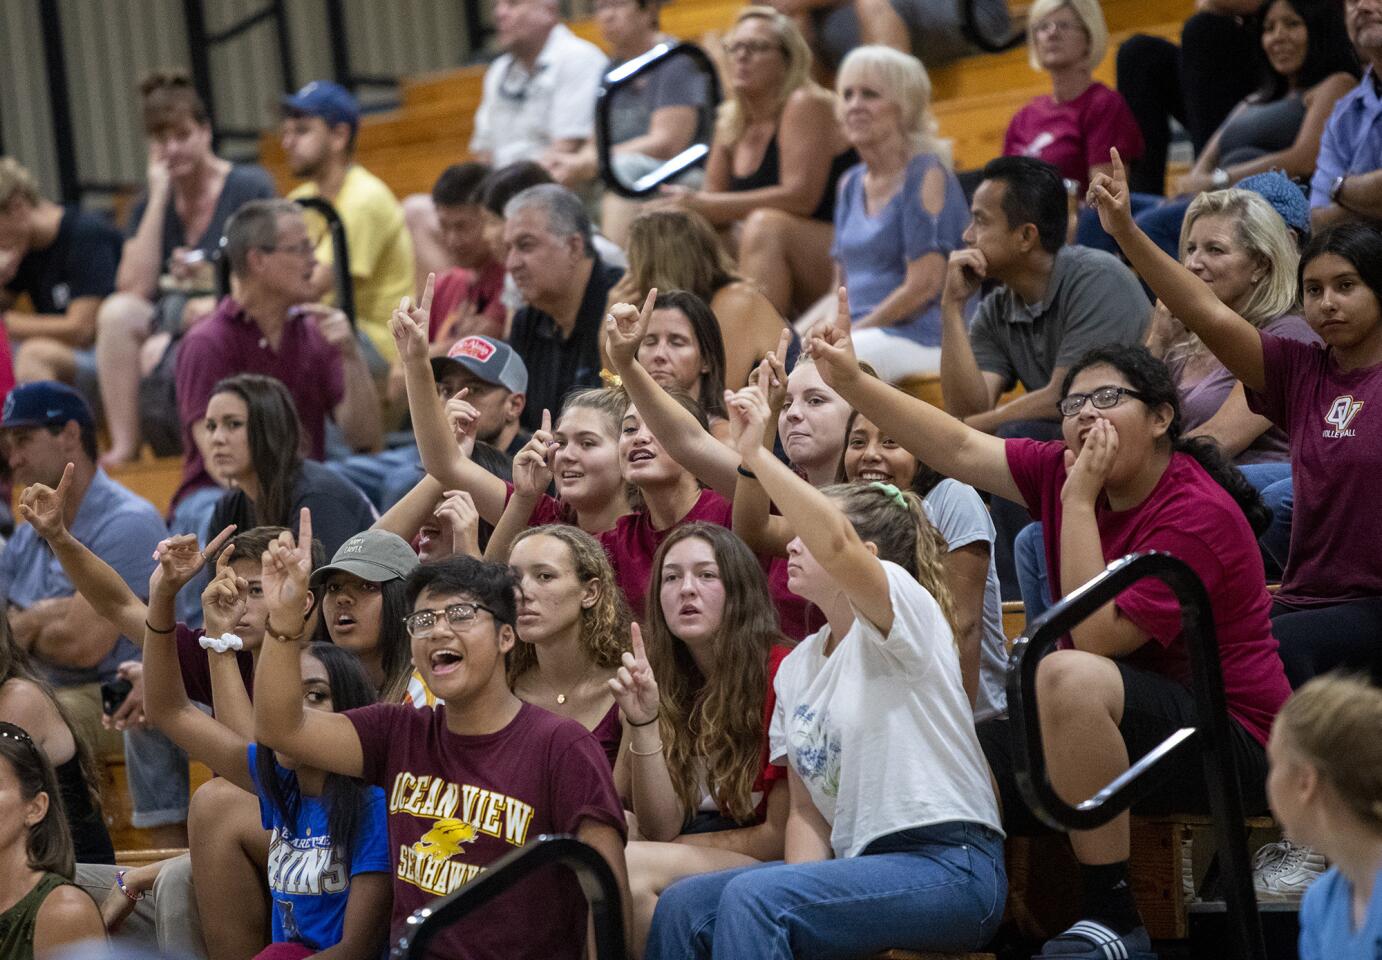 Photo Gallery: Ocean View vs. Marina in a girls' volleyball match